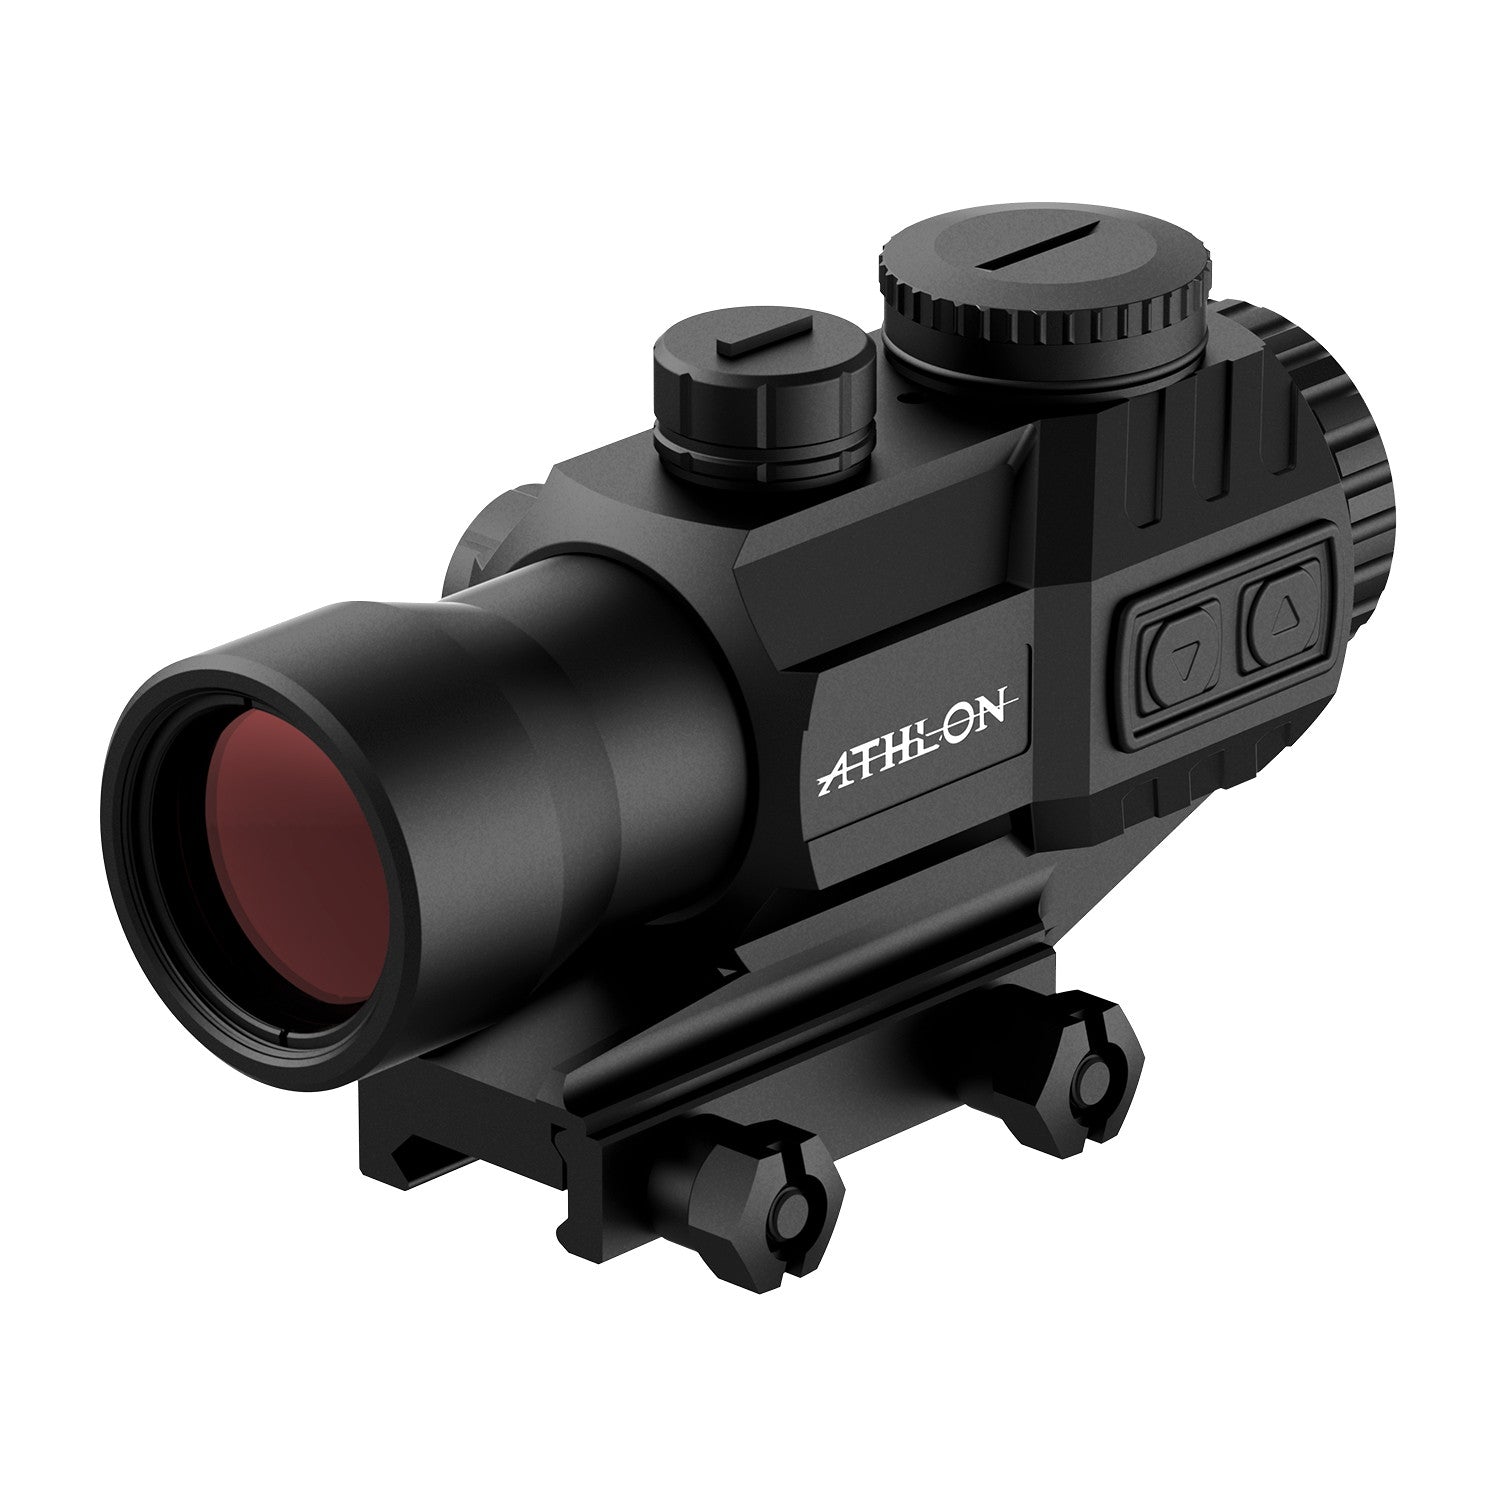 Midas TSP4 Prism, Capped Turrets, Red/Green Reticle